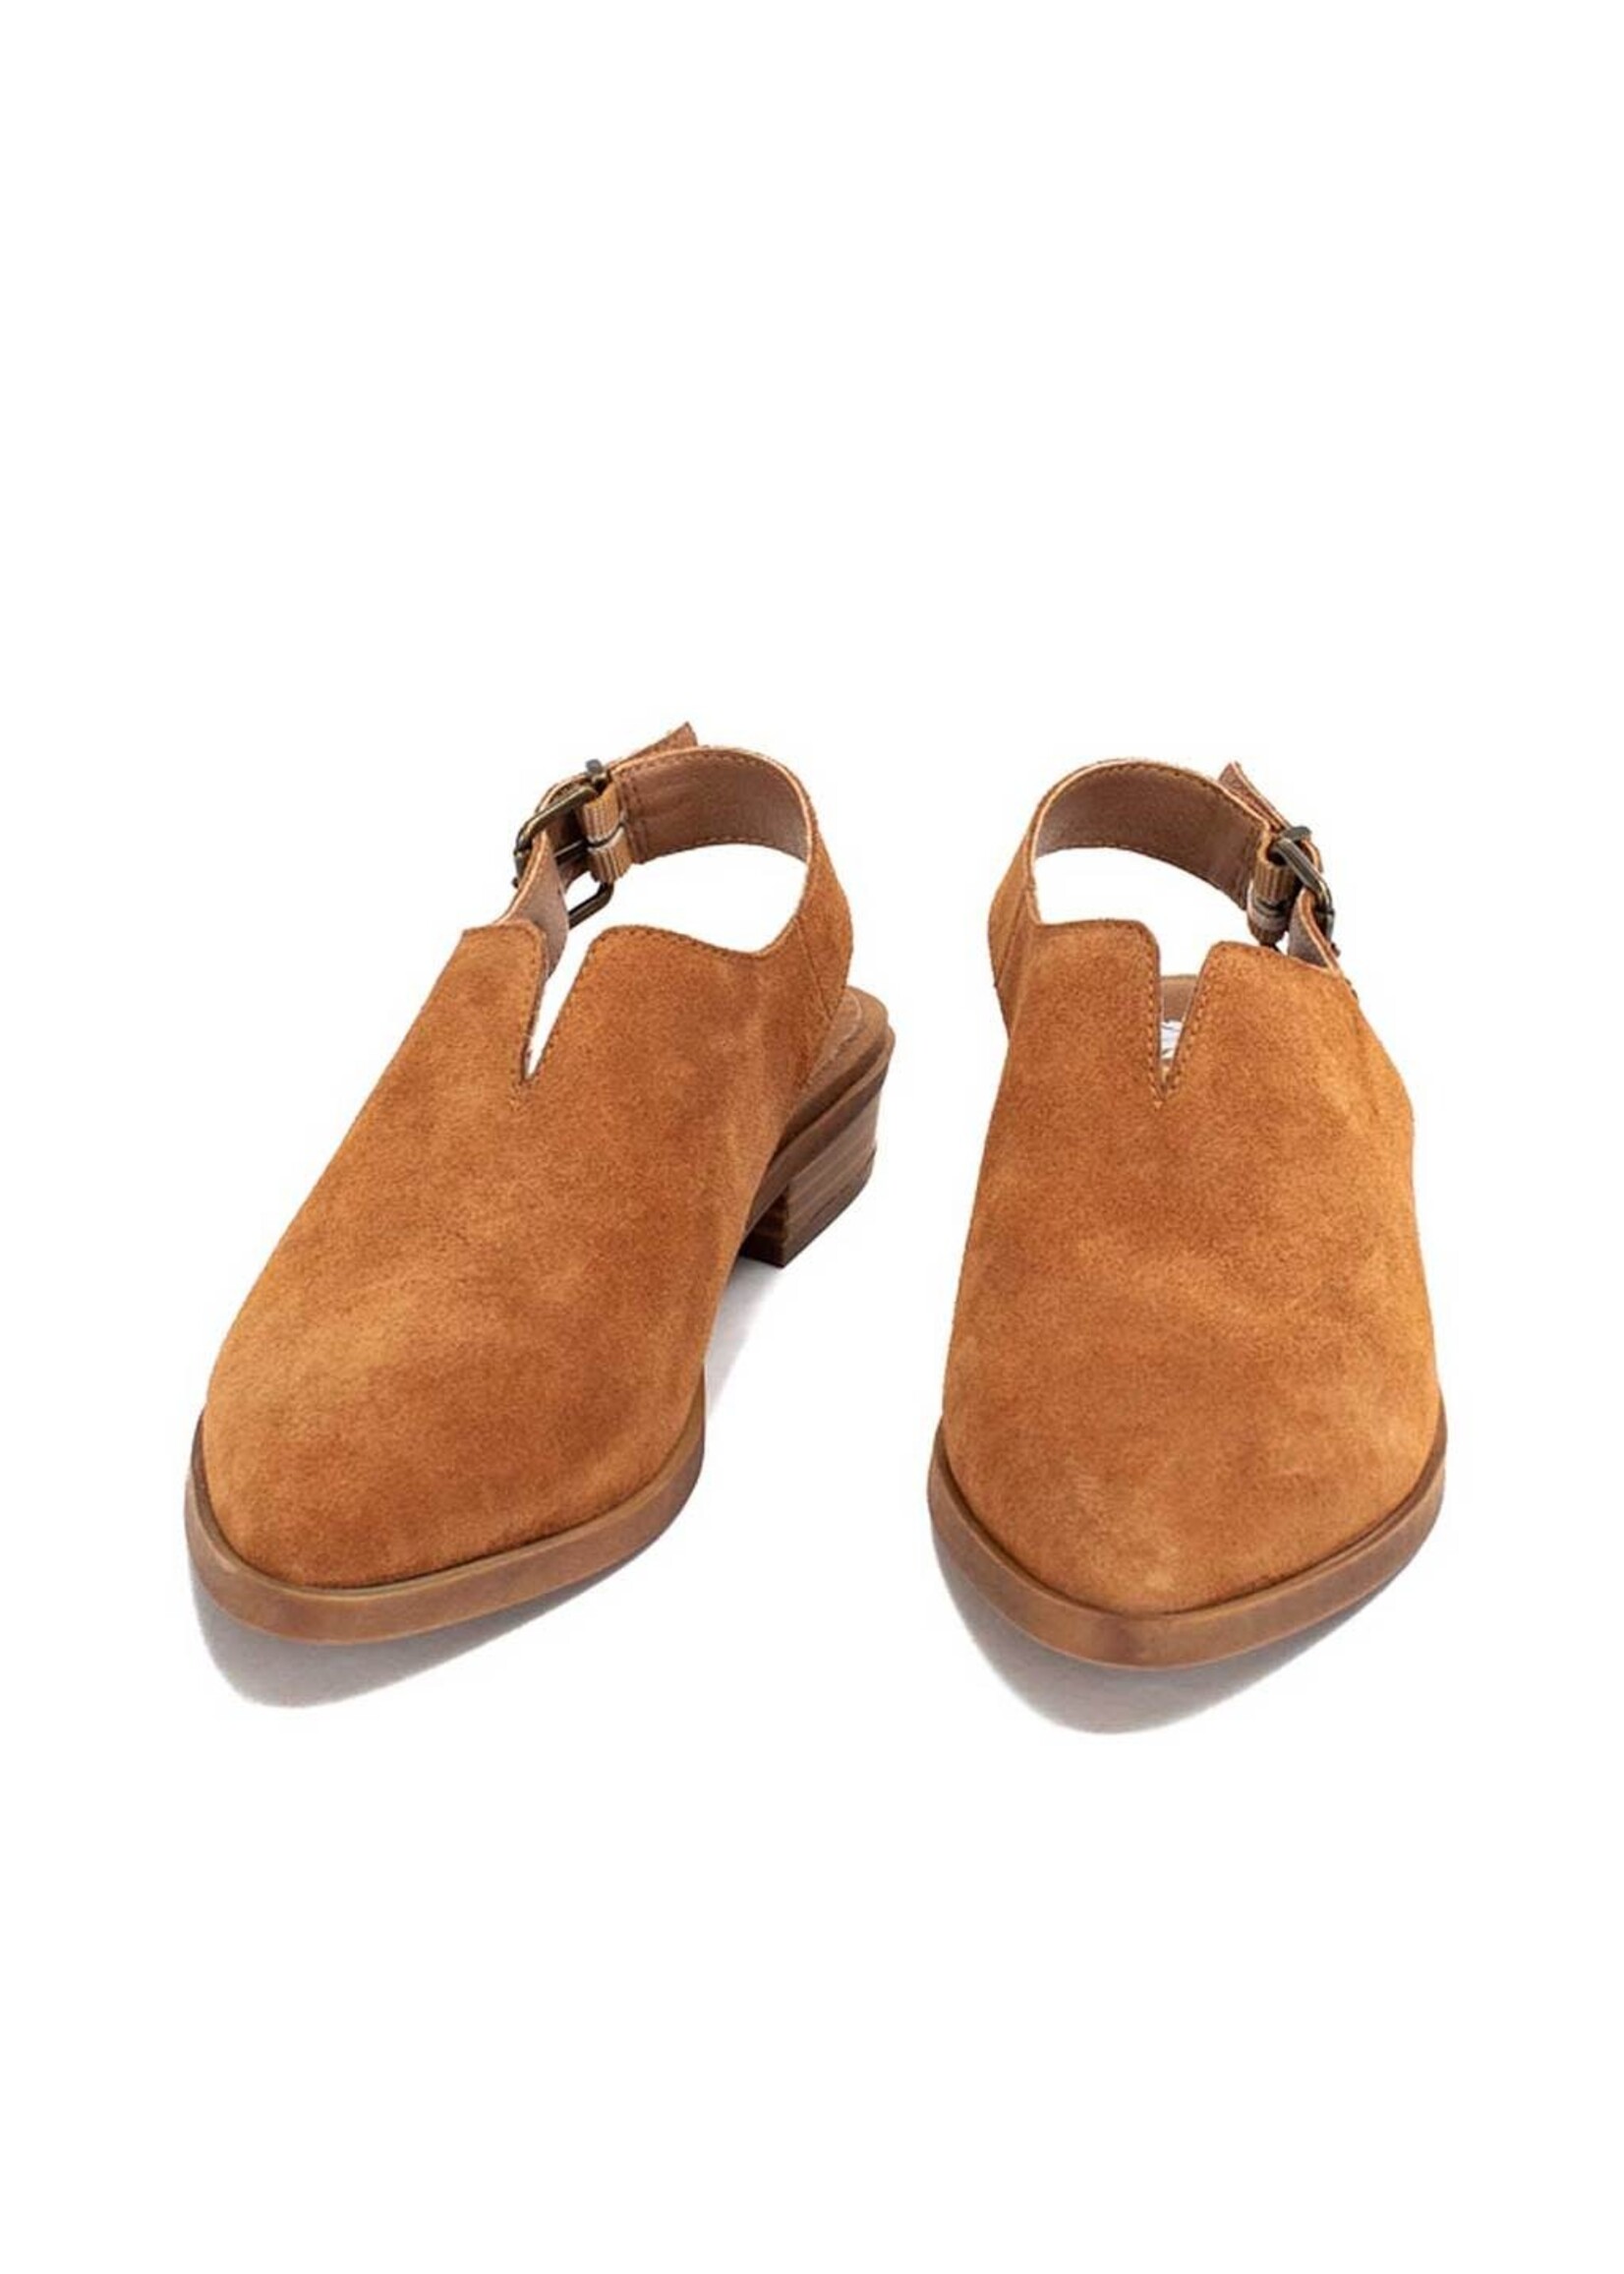 Yellow Box Shoes Freedah Toffee by Yellow Box